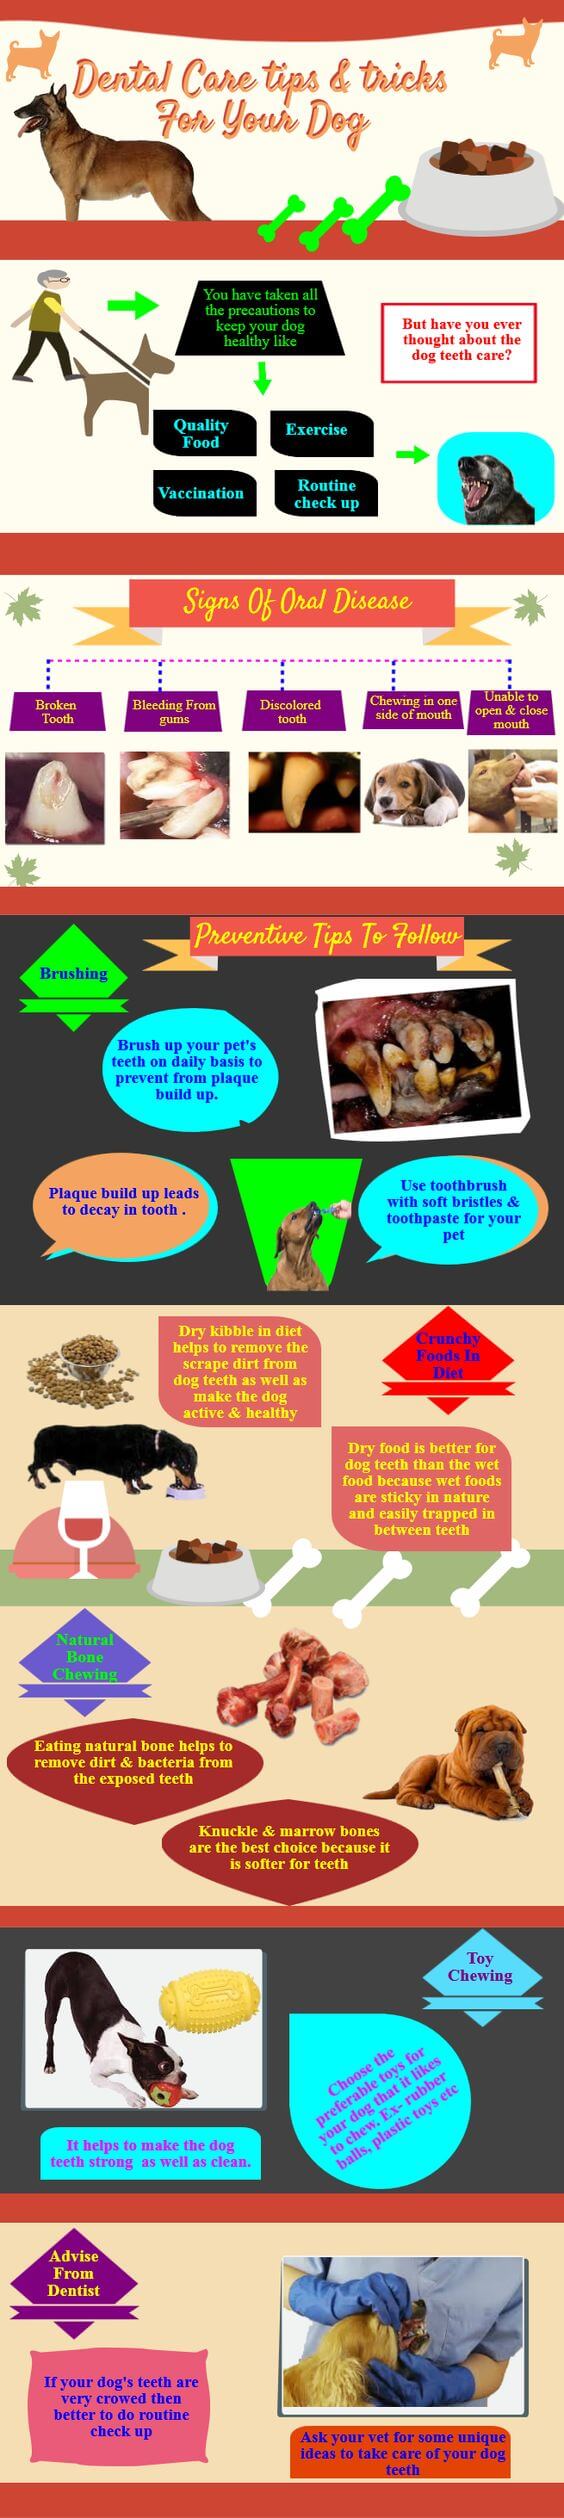 DOG AND PUPPY TEETH CARE and HEALTH INFOGRAPHIC - PRESS TO SEE IN FULL SIZE